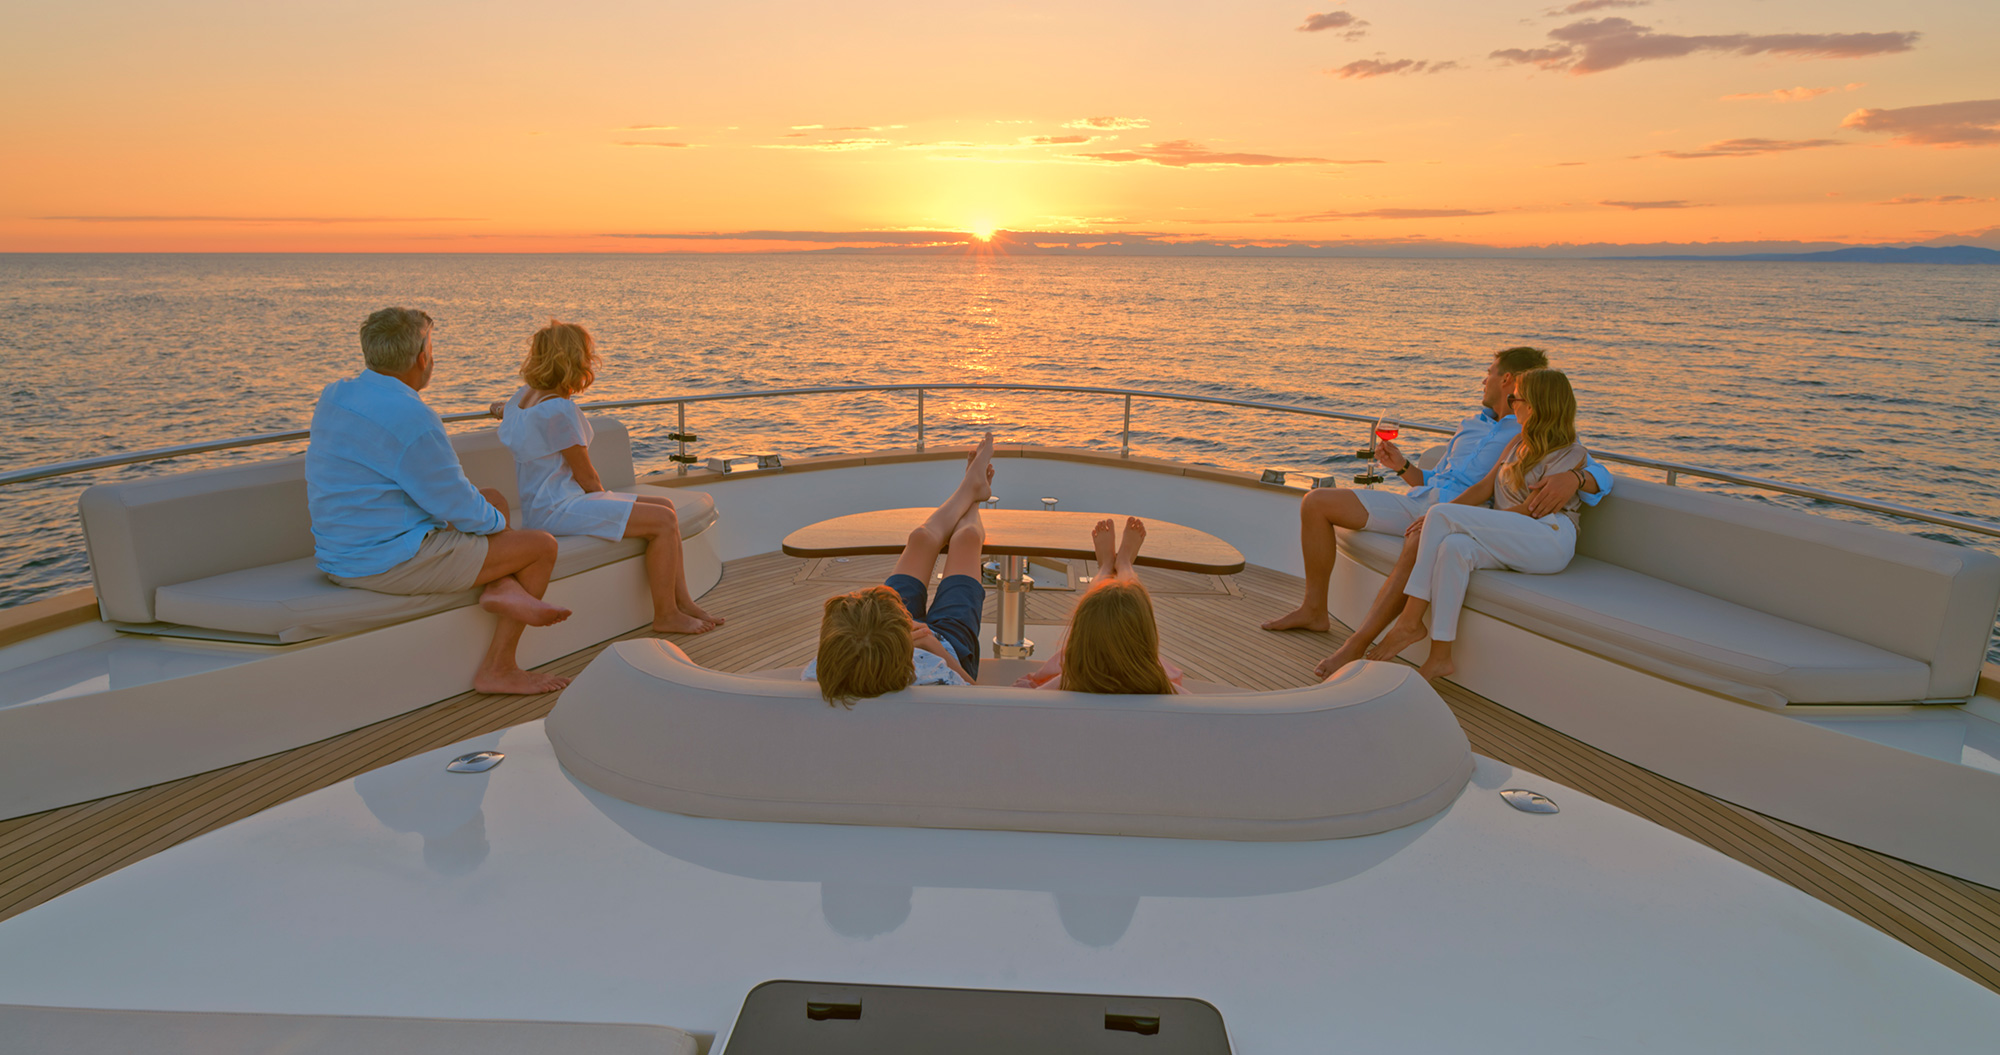 exclusive yachts membership cost